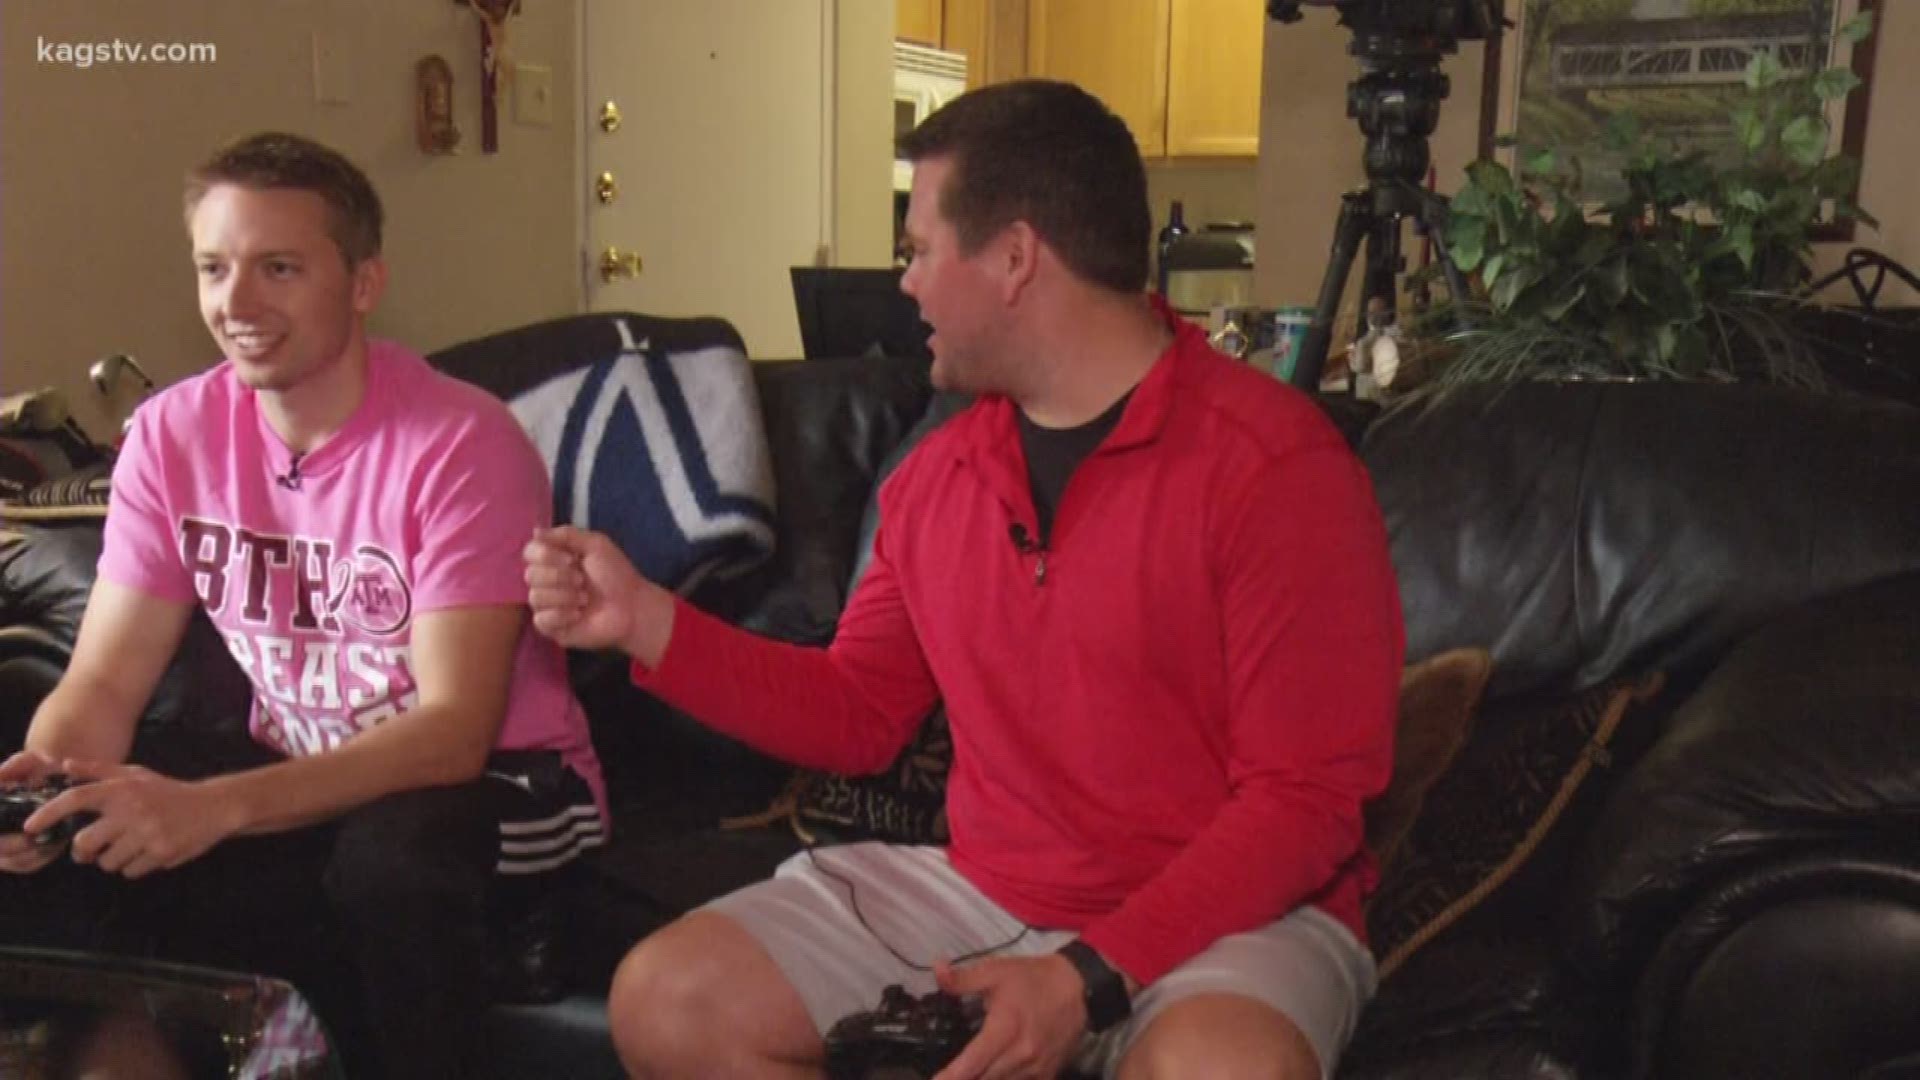 In the first KAGS Sports challenge, Justin faced Mike in a game of NCAA Football. Mike earned the seven point win.